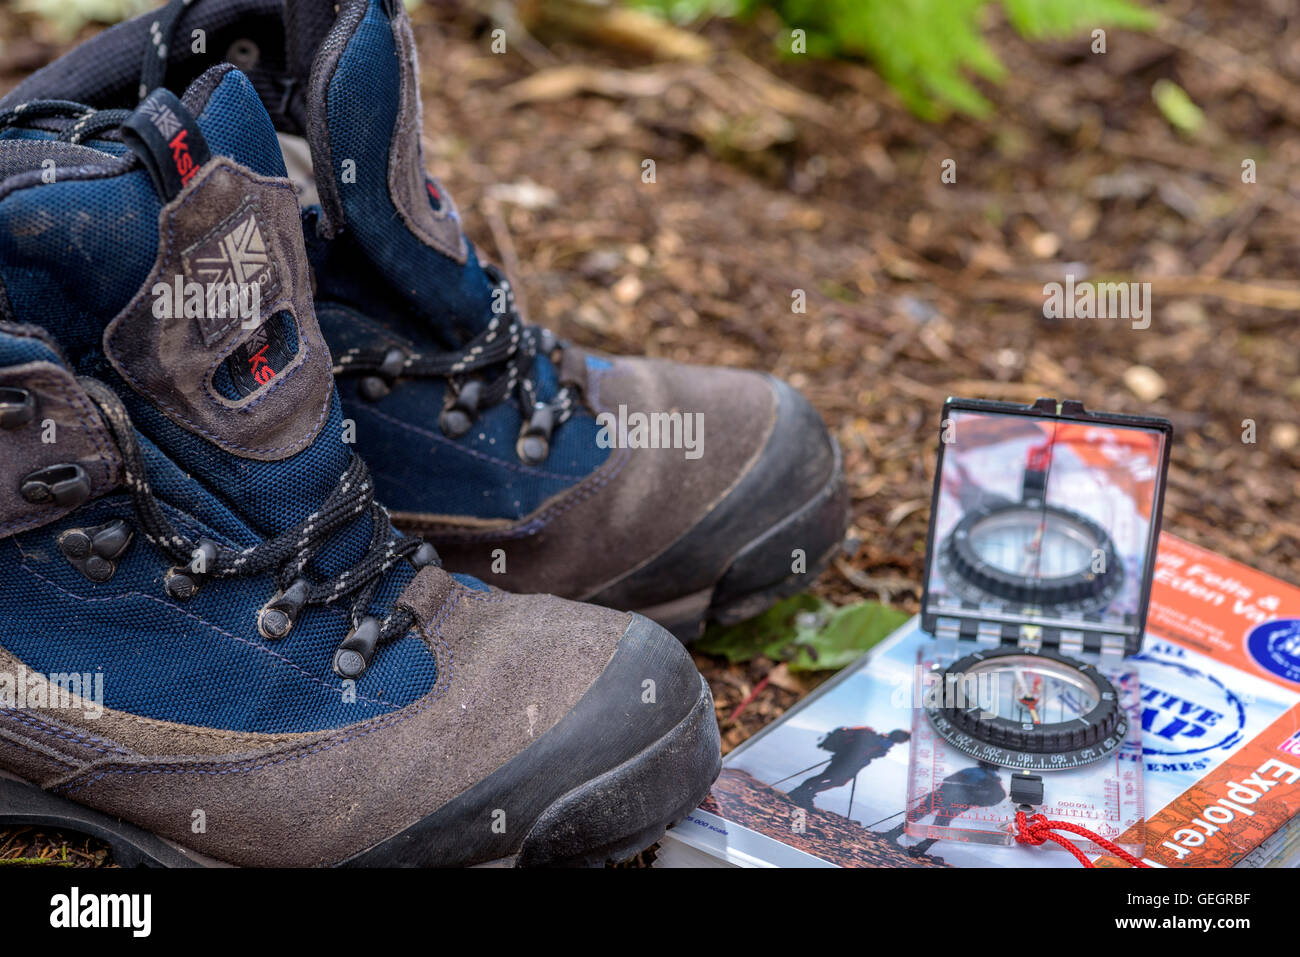 Pair of walking boots with a map and compass, on a woodland floor. Stock Photo